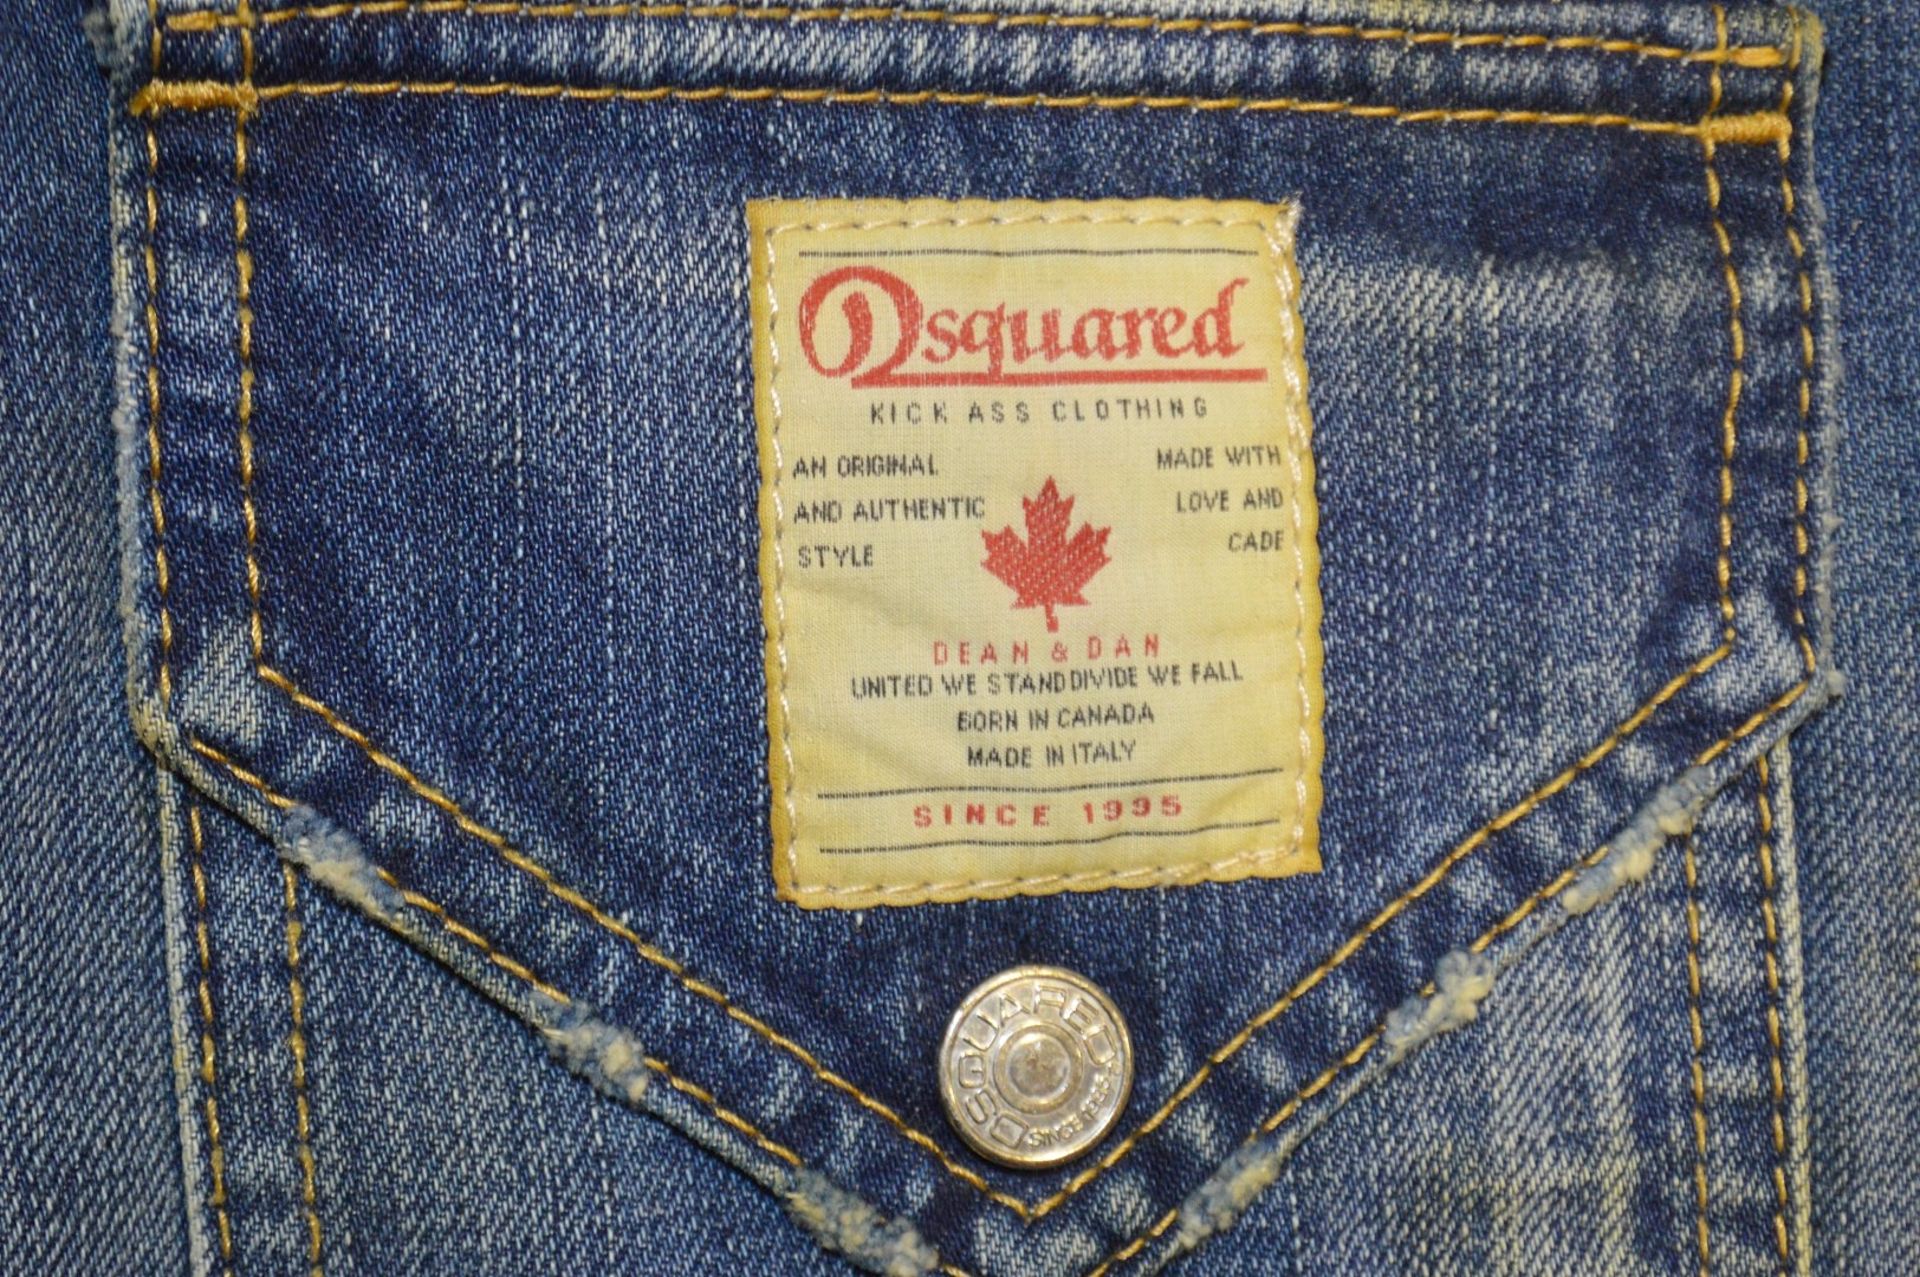 1 x Pair Of Men's Genuine Dsquared2 Distressed-Style Jeans Jeans In Dark Blue - Waist Size: UK30 - Image 4 of 9